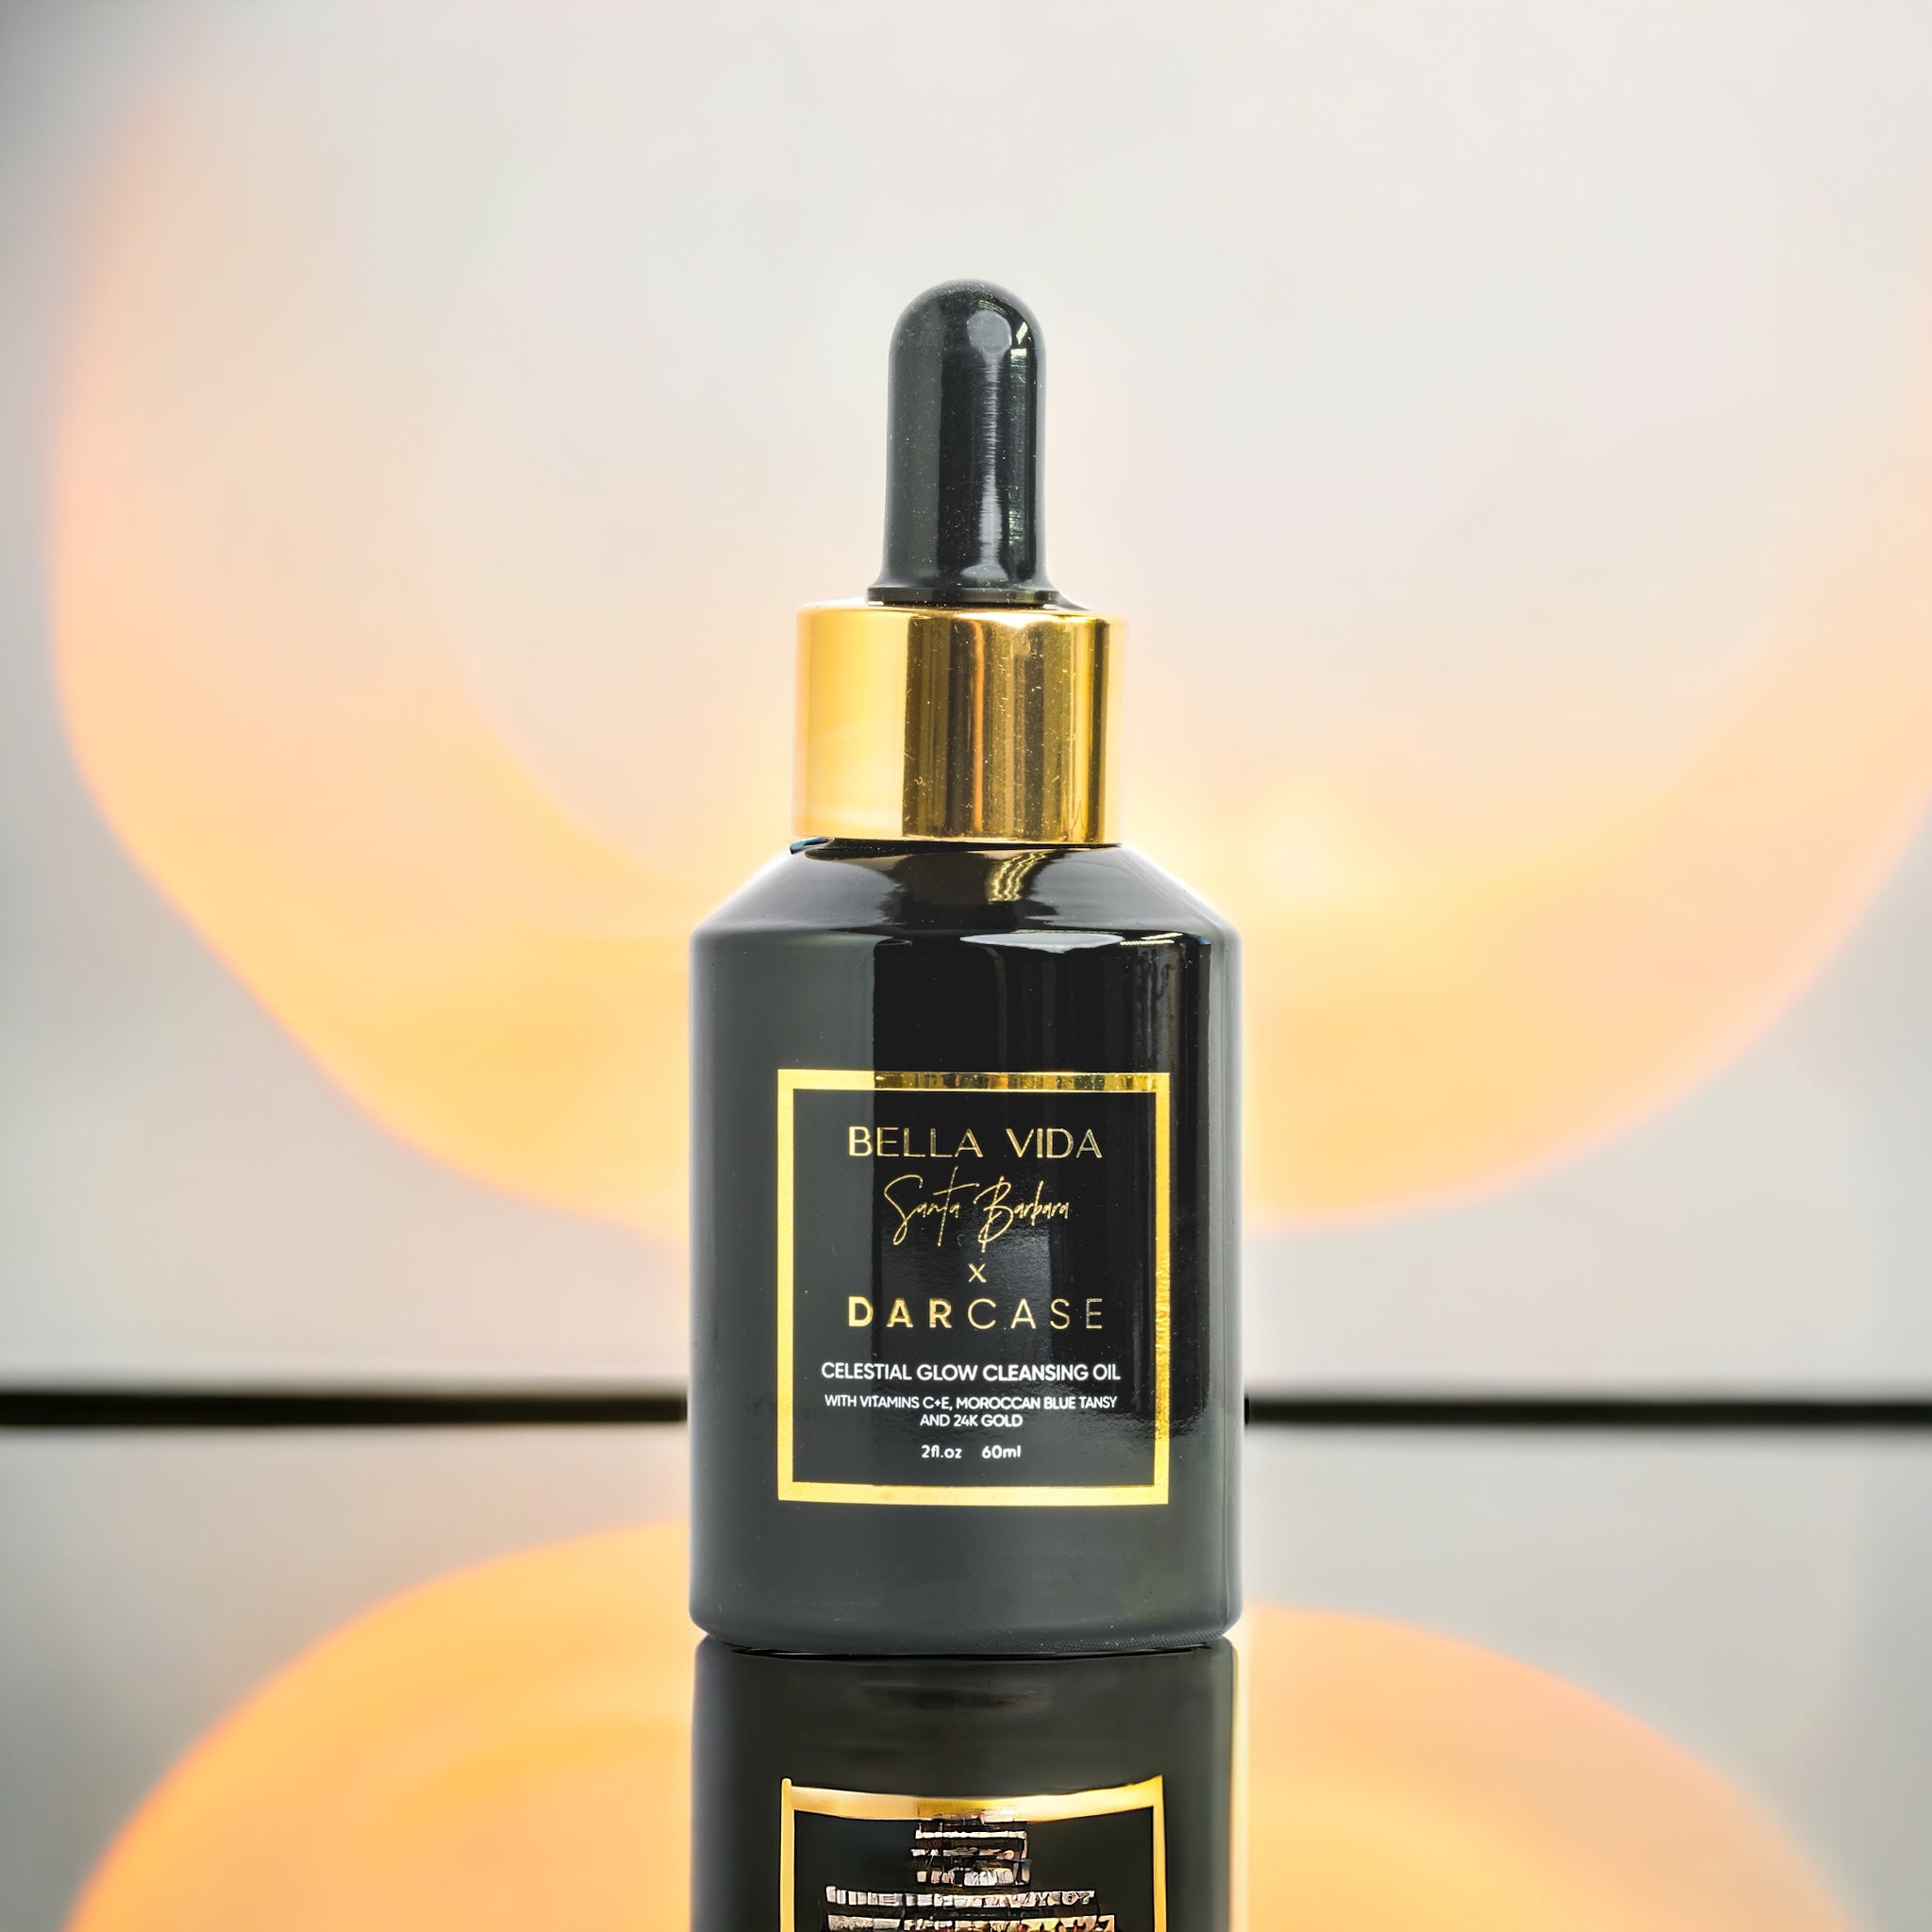 New! Celestial Glow Cleansing Oil with Vitamin C, 24k Gold and Moroccan Blue Tansy